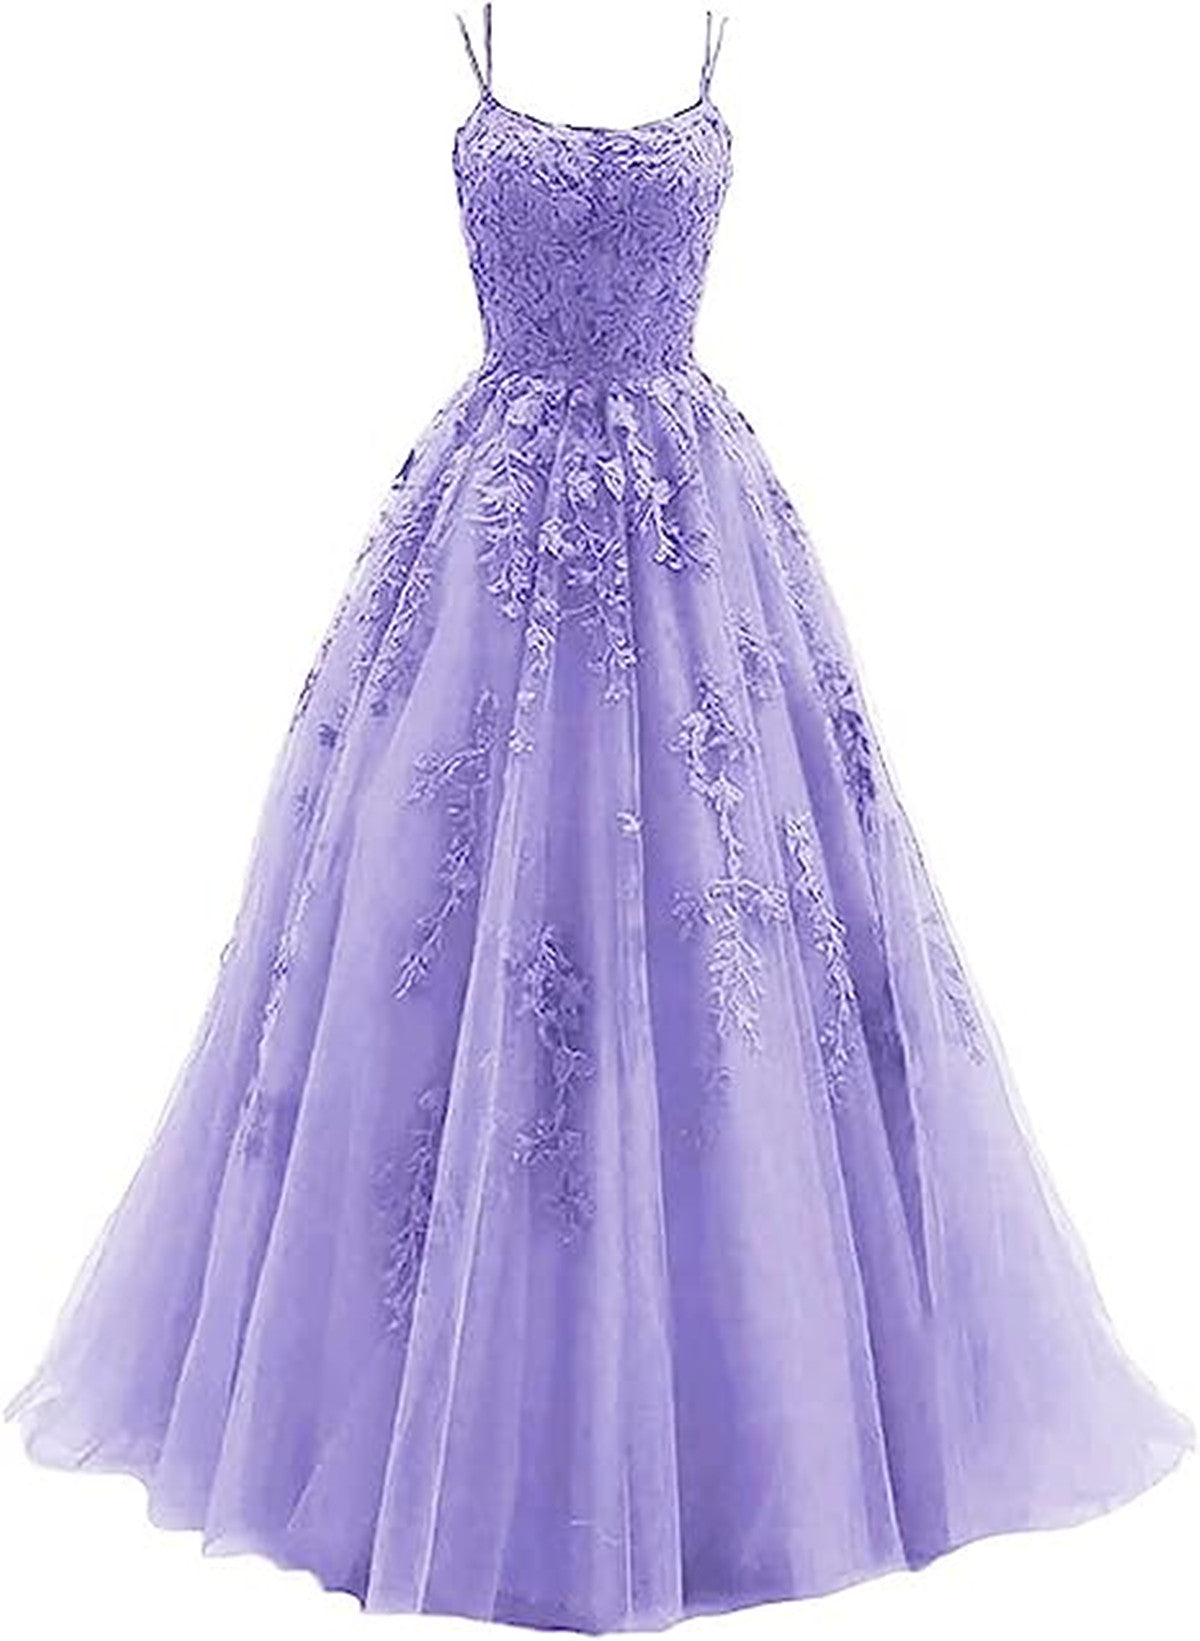 Lavender A-line Tulle with Lace Long Party Dress, Straps Lavender Prom Dress